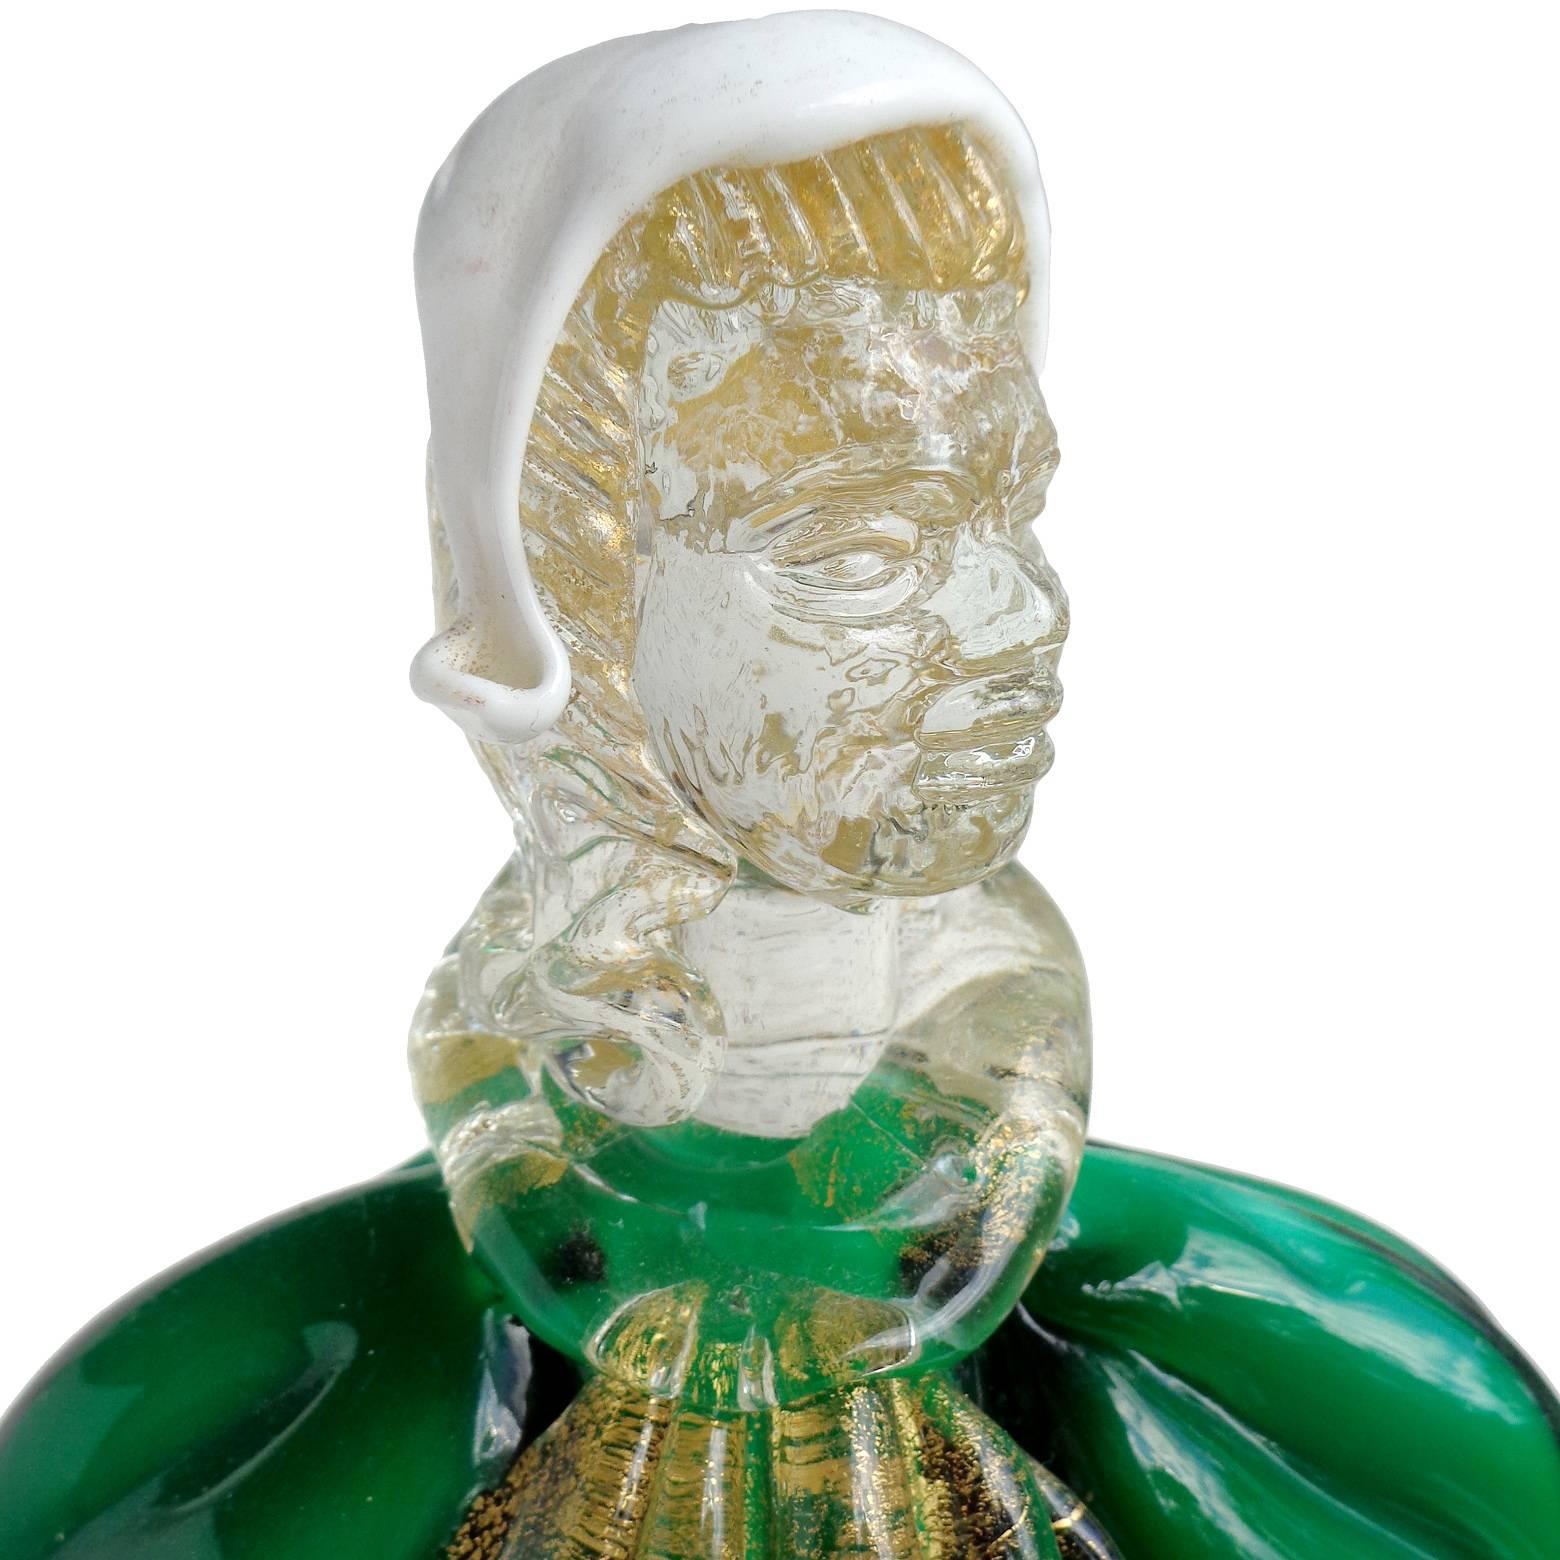 Beautiful vintage Murano hand blown green, red, white and gold flecks Italian art glass woman figure. The piece looks to be in traditional Dutch or German dress (please correct me if I am wrong). It stands on a swirling gold leaf base and has other